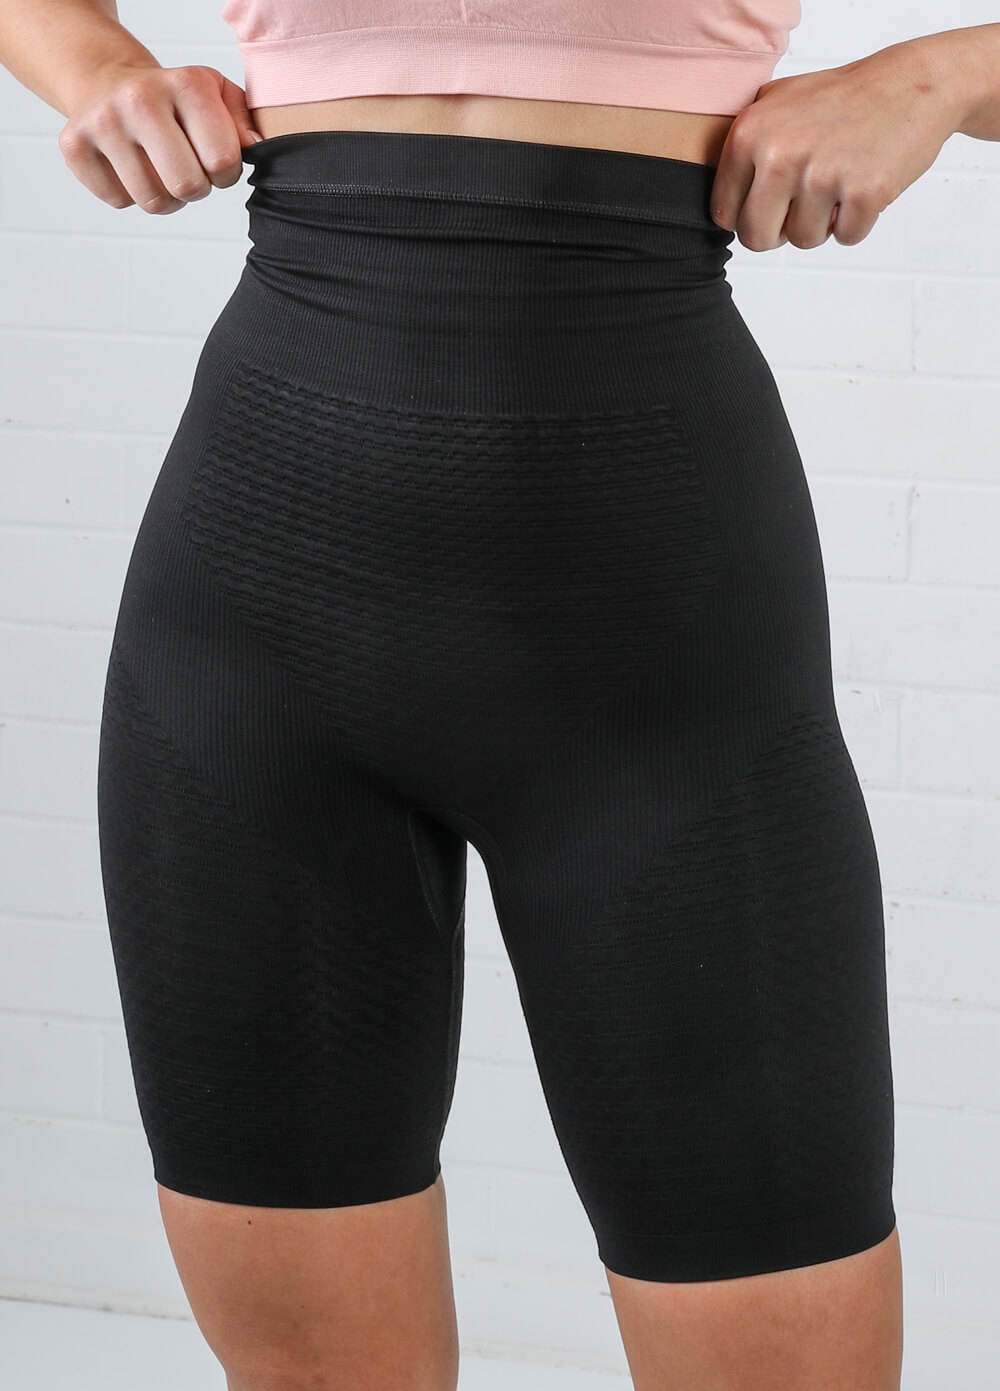 High Waist Postpartum Recovery Shorts in Black by Queen Bee 